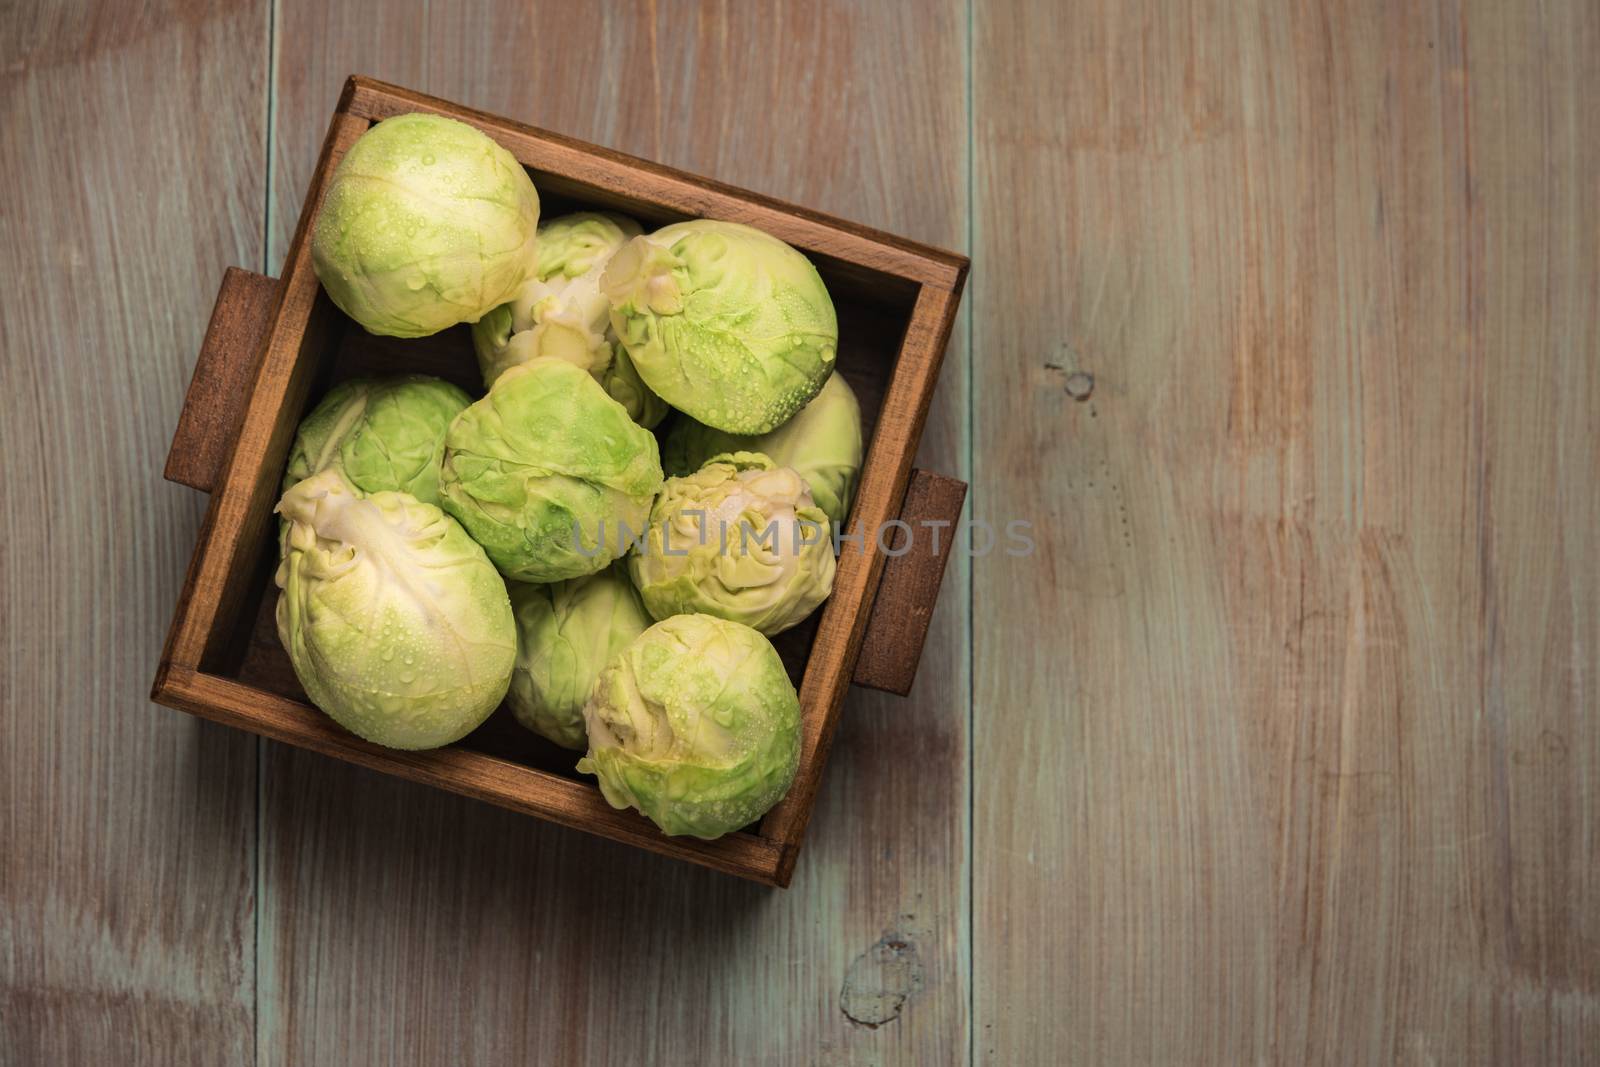 Fresh brussel sprouts over rustic wooden texture. Top view with  by AnaMarques